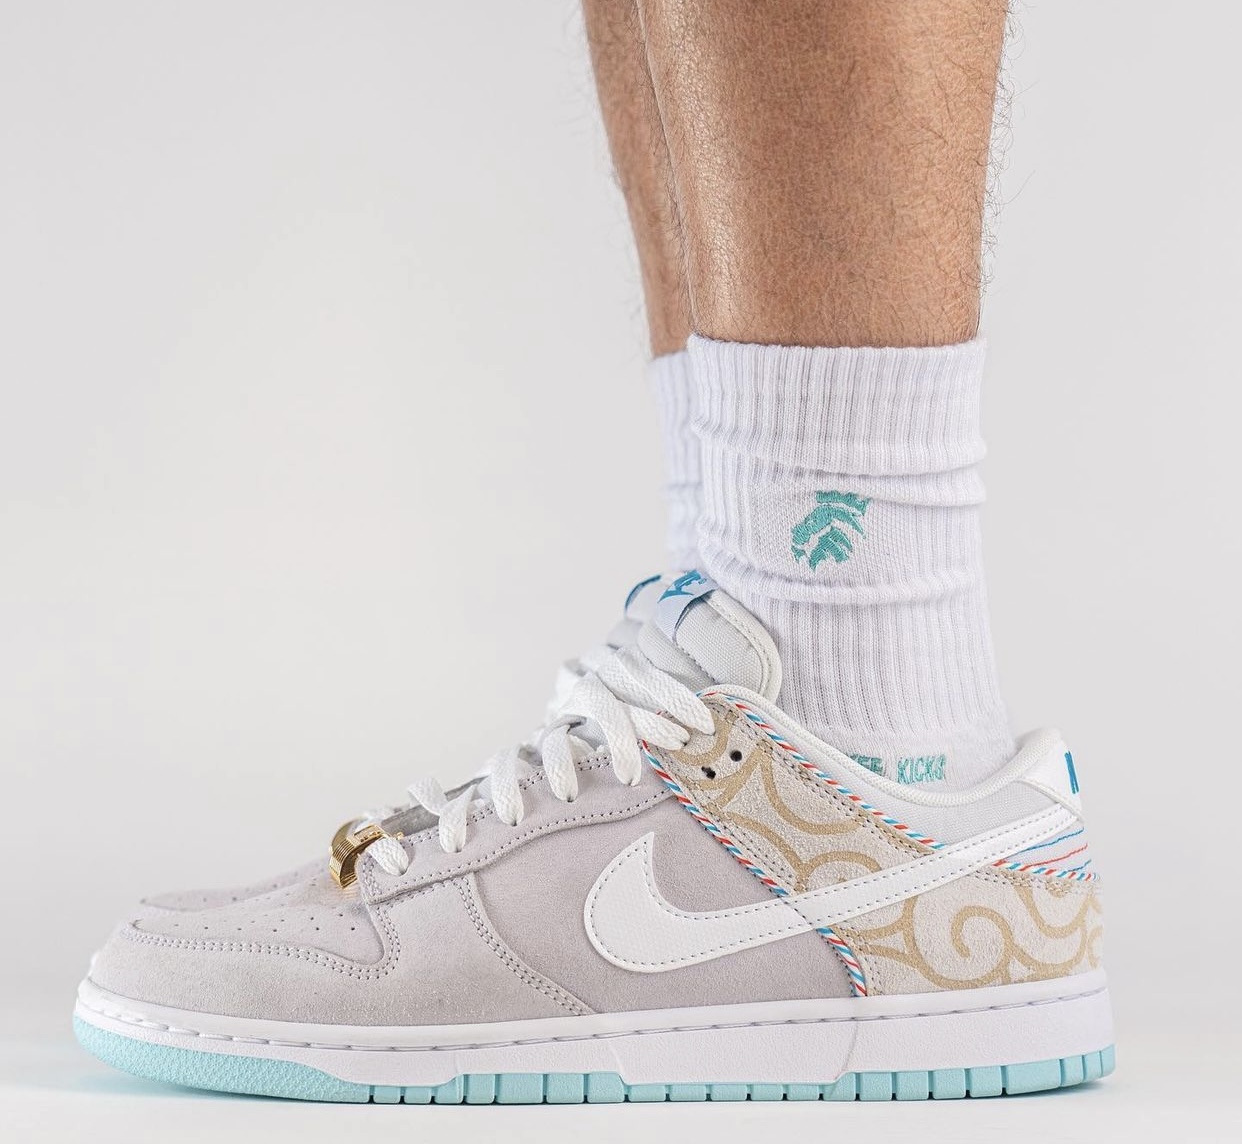 Nike Dunk Low Barber Shop White DH7614-500 Release Date On-Feet